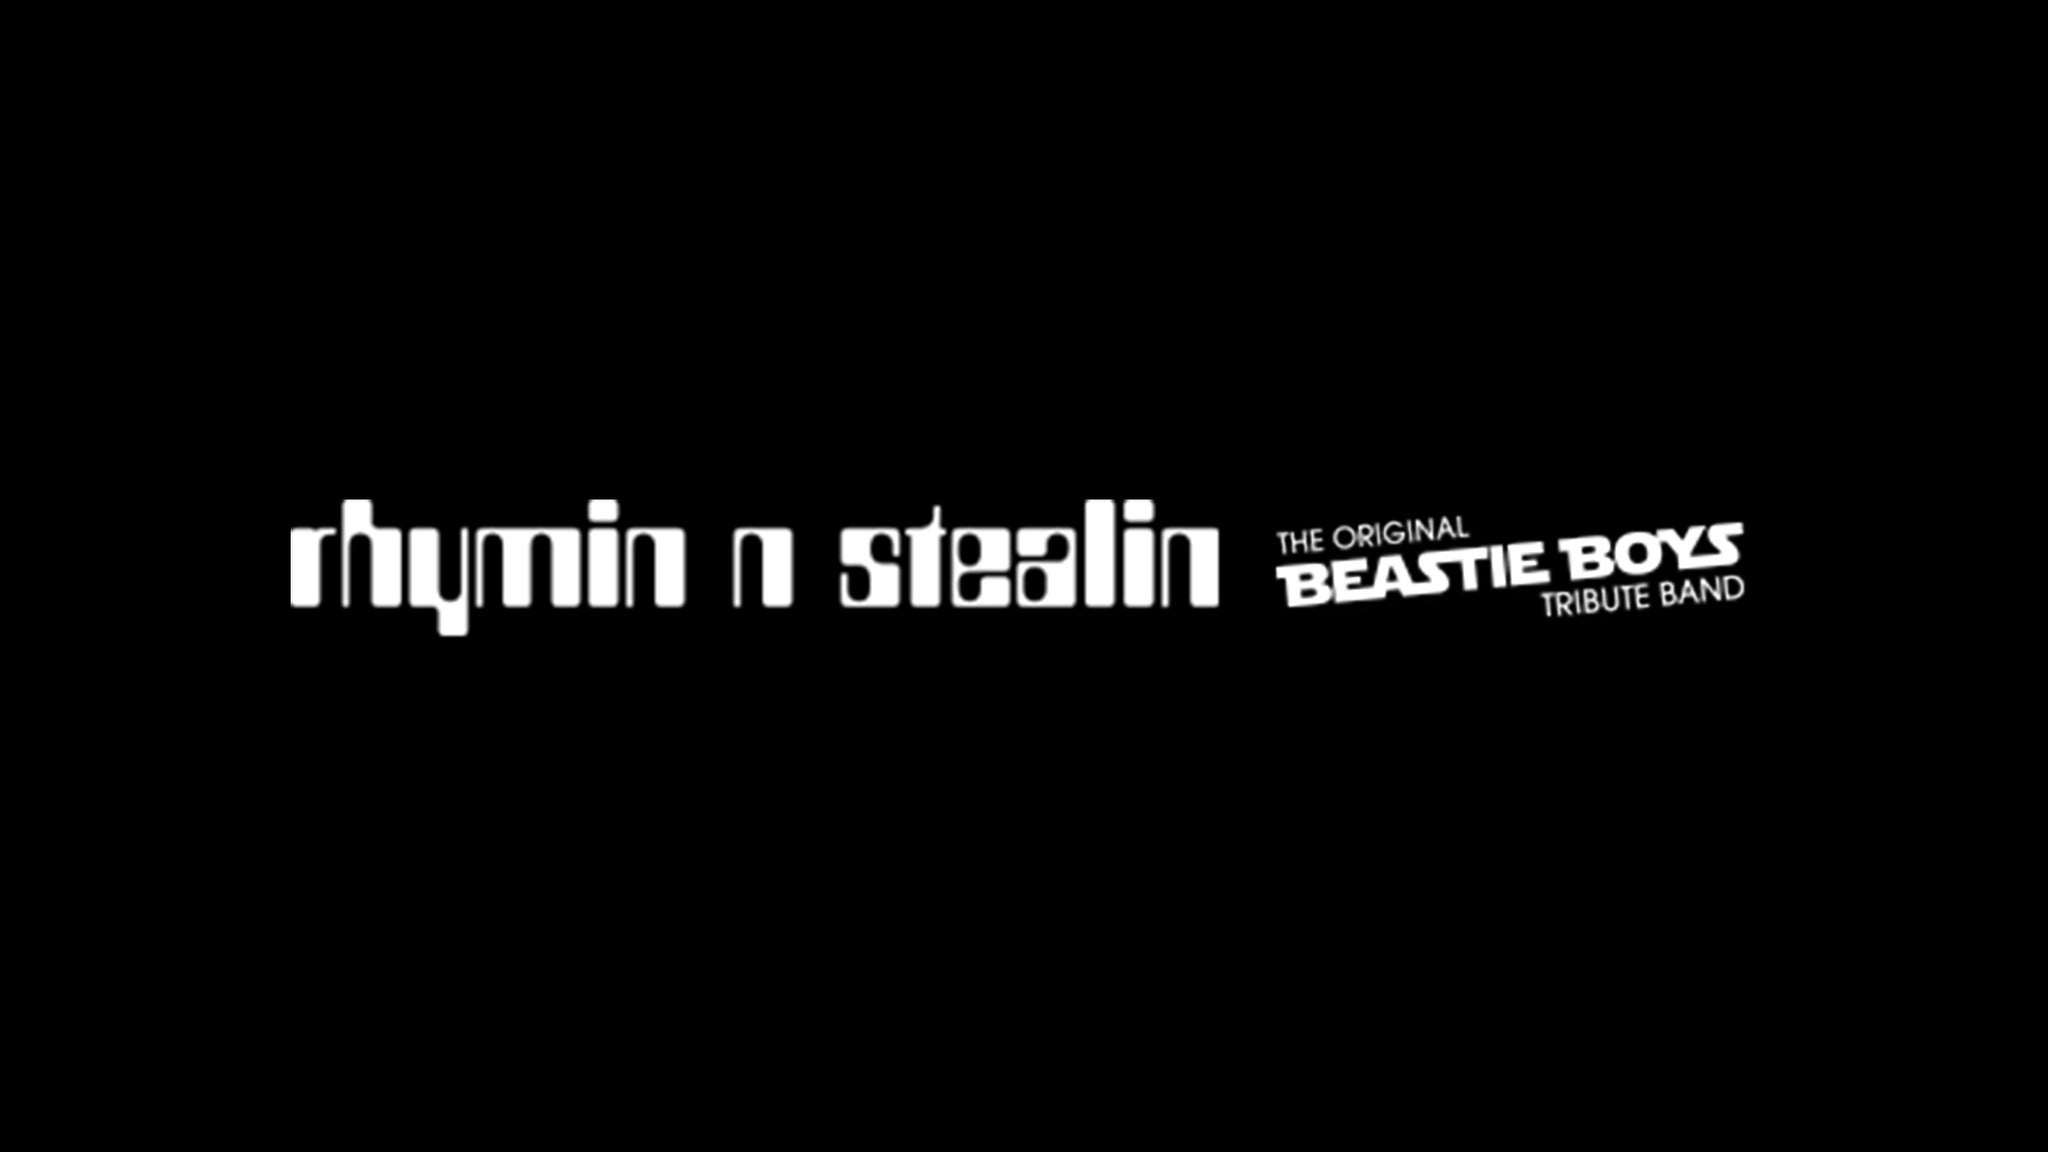 Rhymin' N' Stealin' - The Original Beastie Boys Tribute in Cleveland promo photo for Live Nation presale offer code